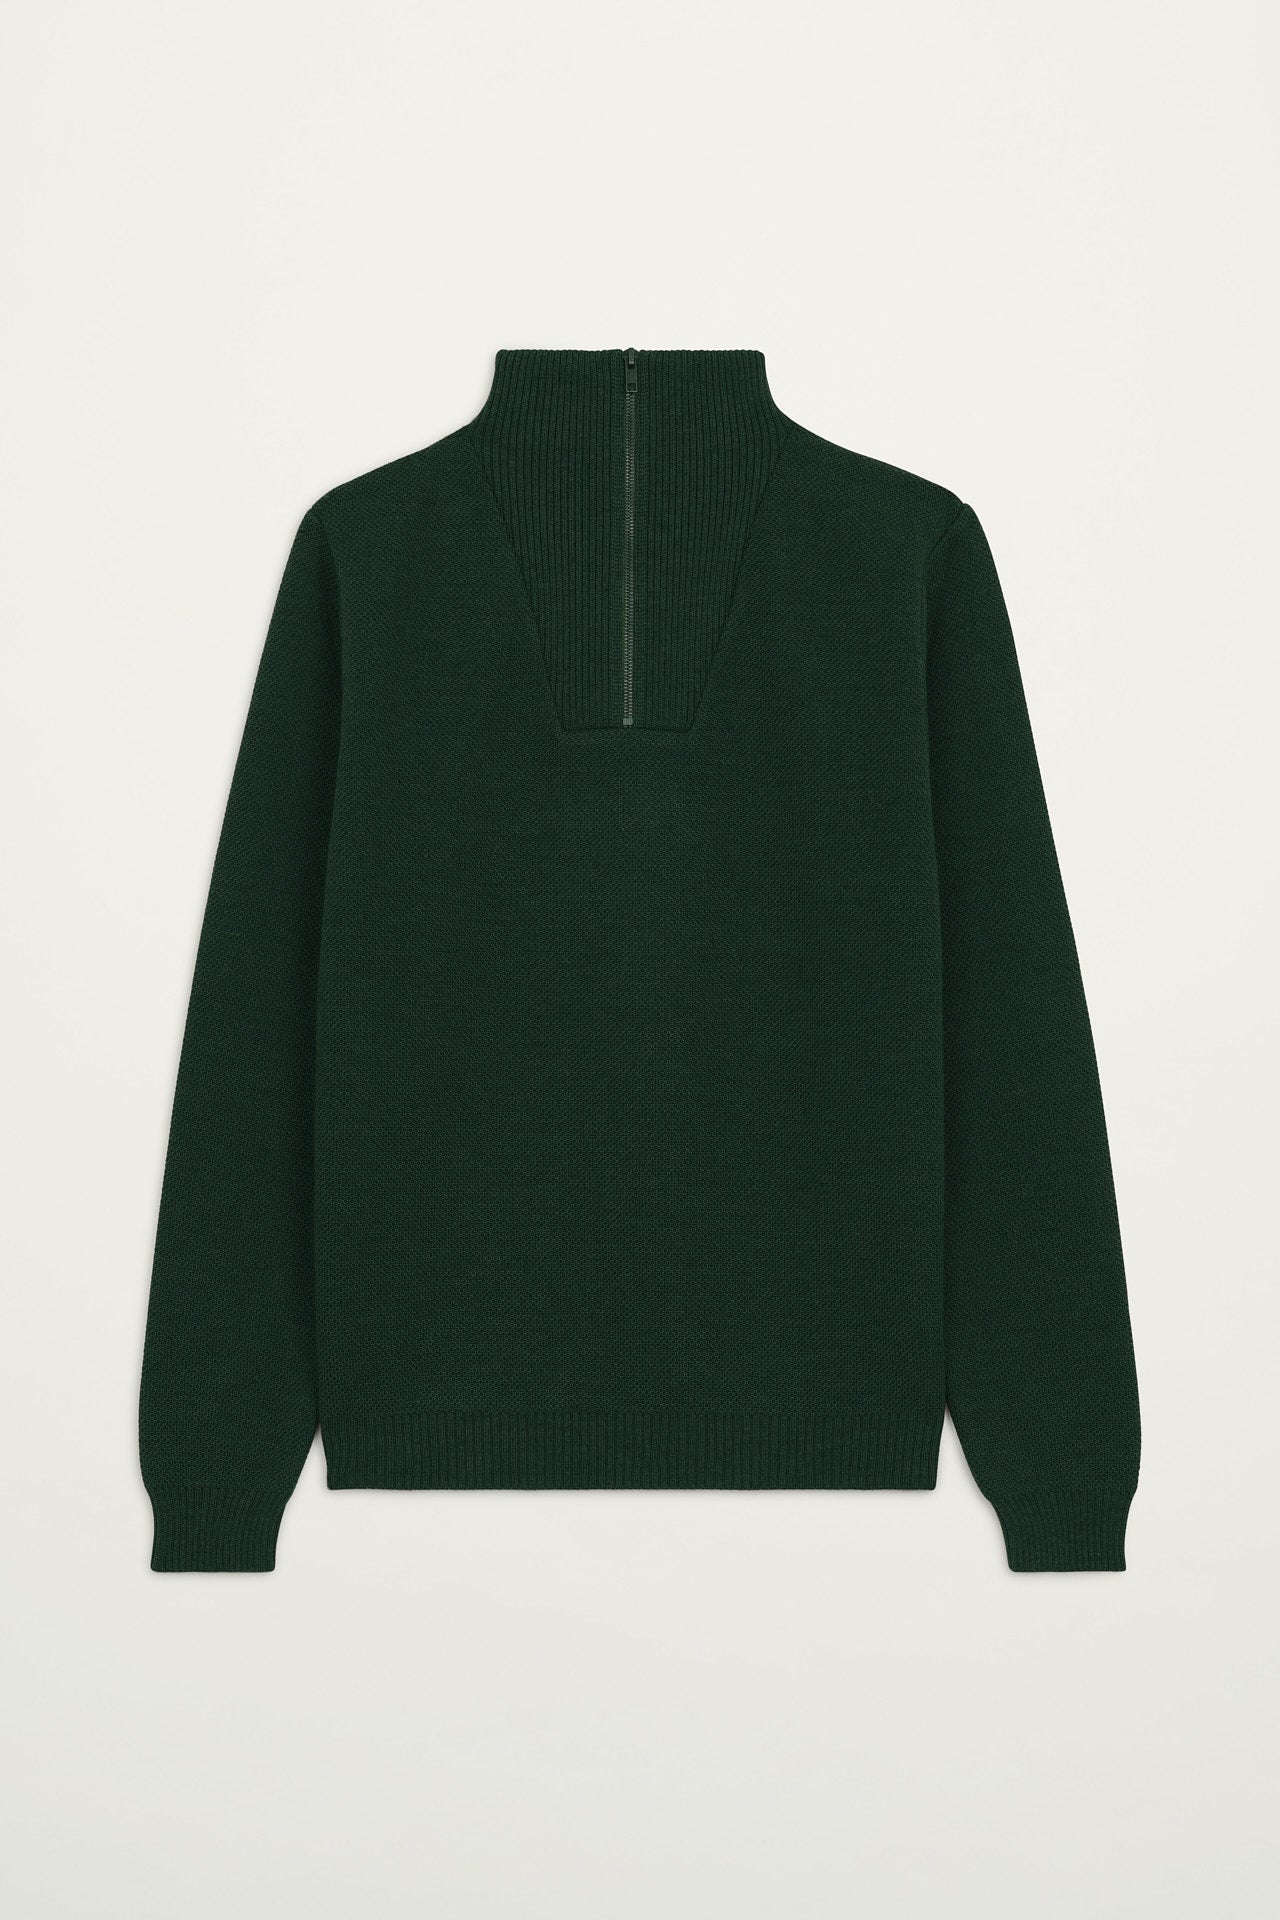 NITTO KNITWEAR PULL YOURI CAMIONNEUR - VERT FORET